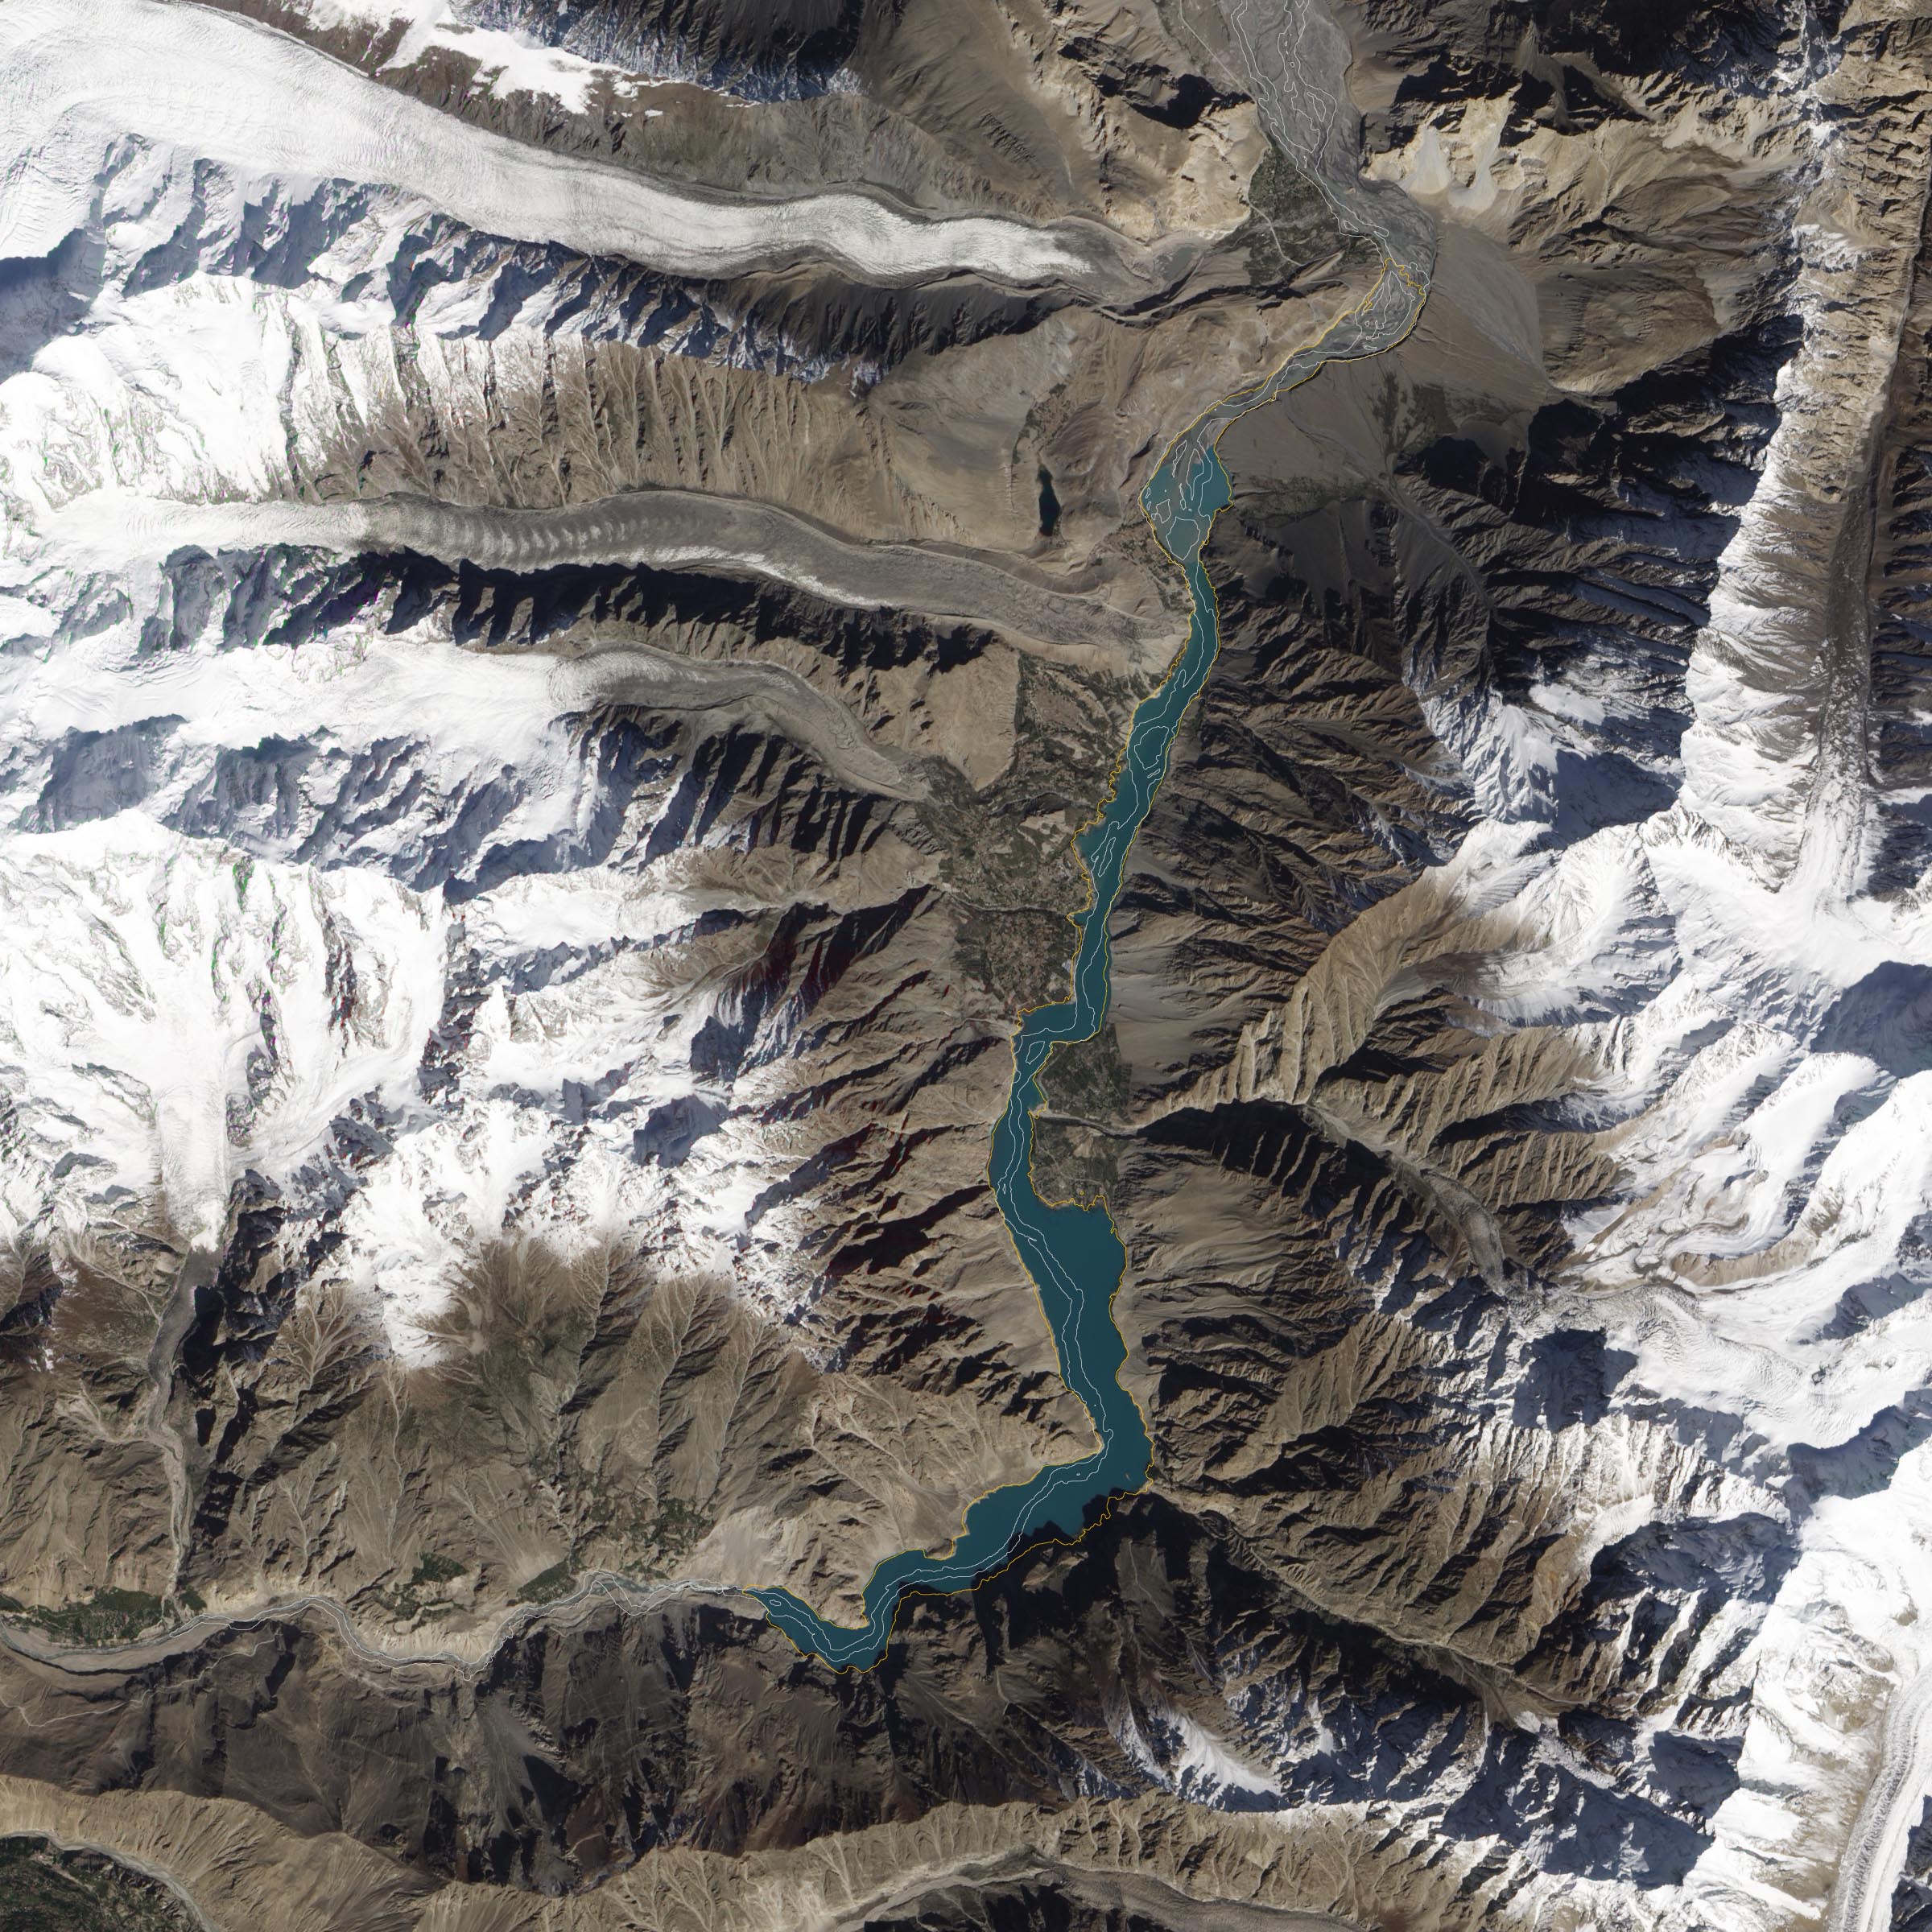 Landslide Lake in Northwest Pakistan - related image preview